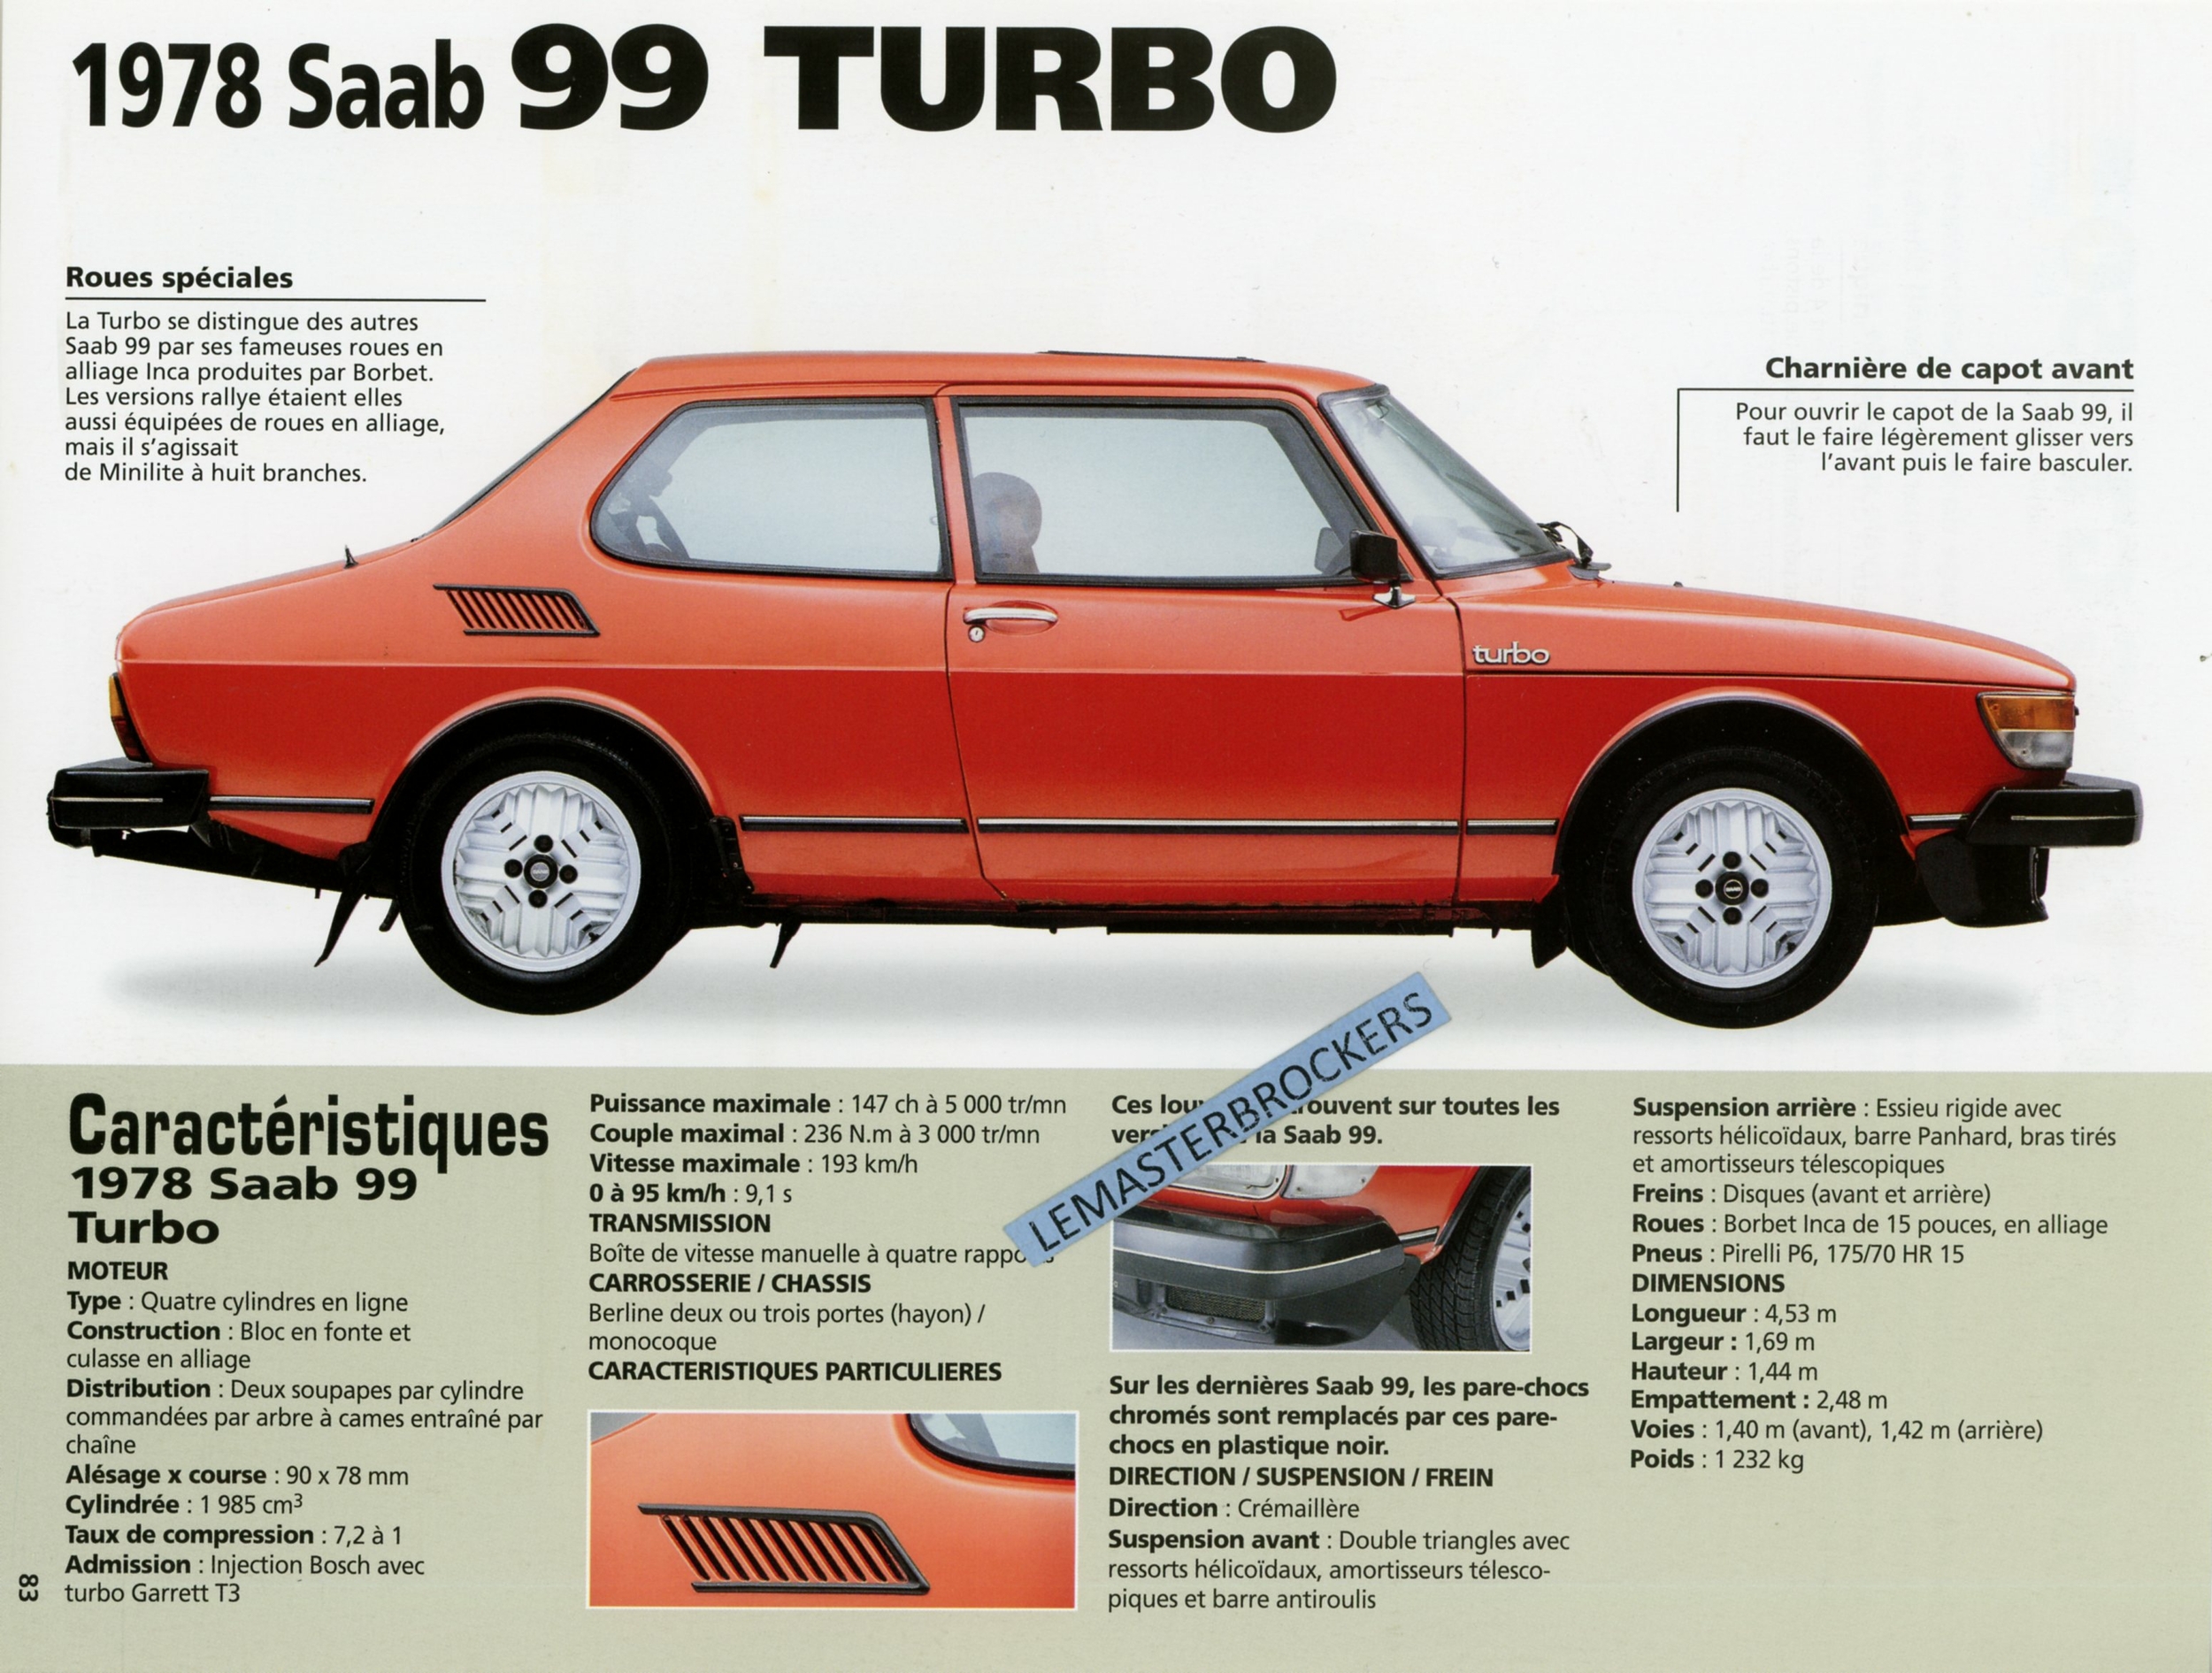 FICHE AUTO SAAB 99 TURBO 1978 - MUSTANG SHELBY GT 350 1966